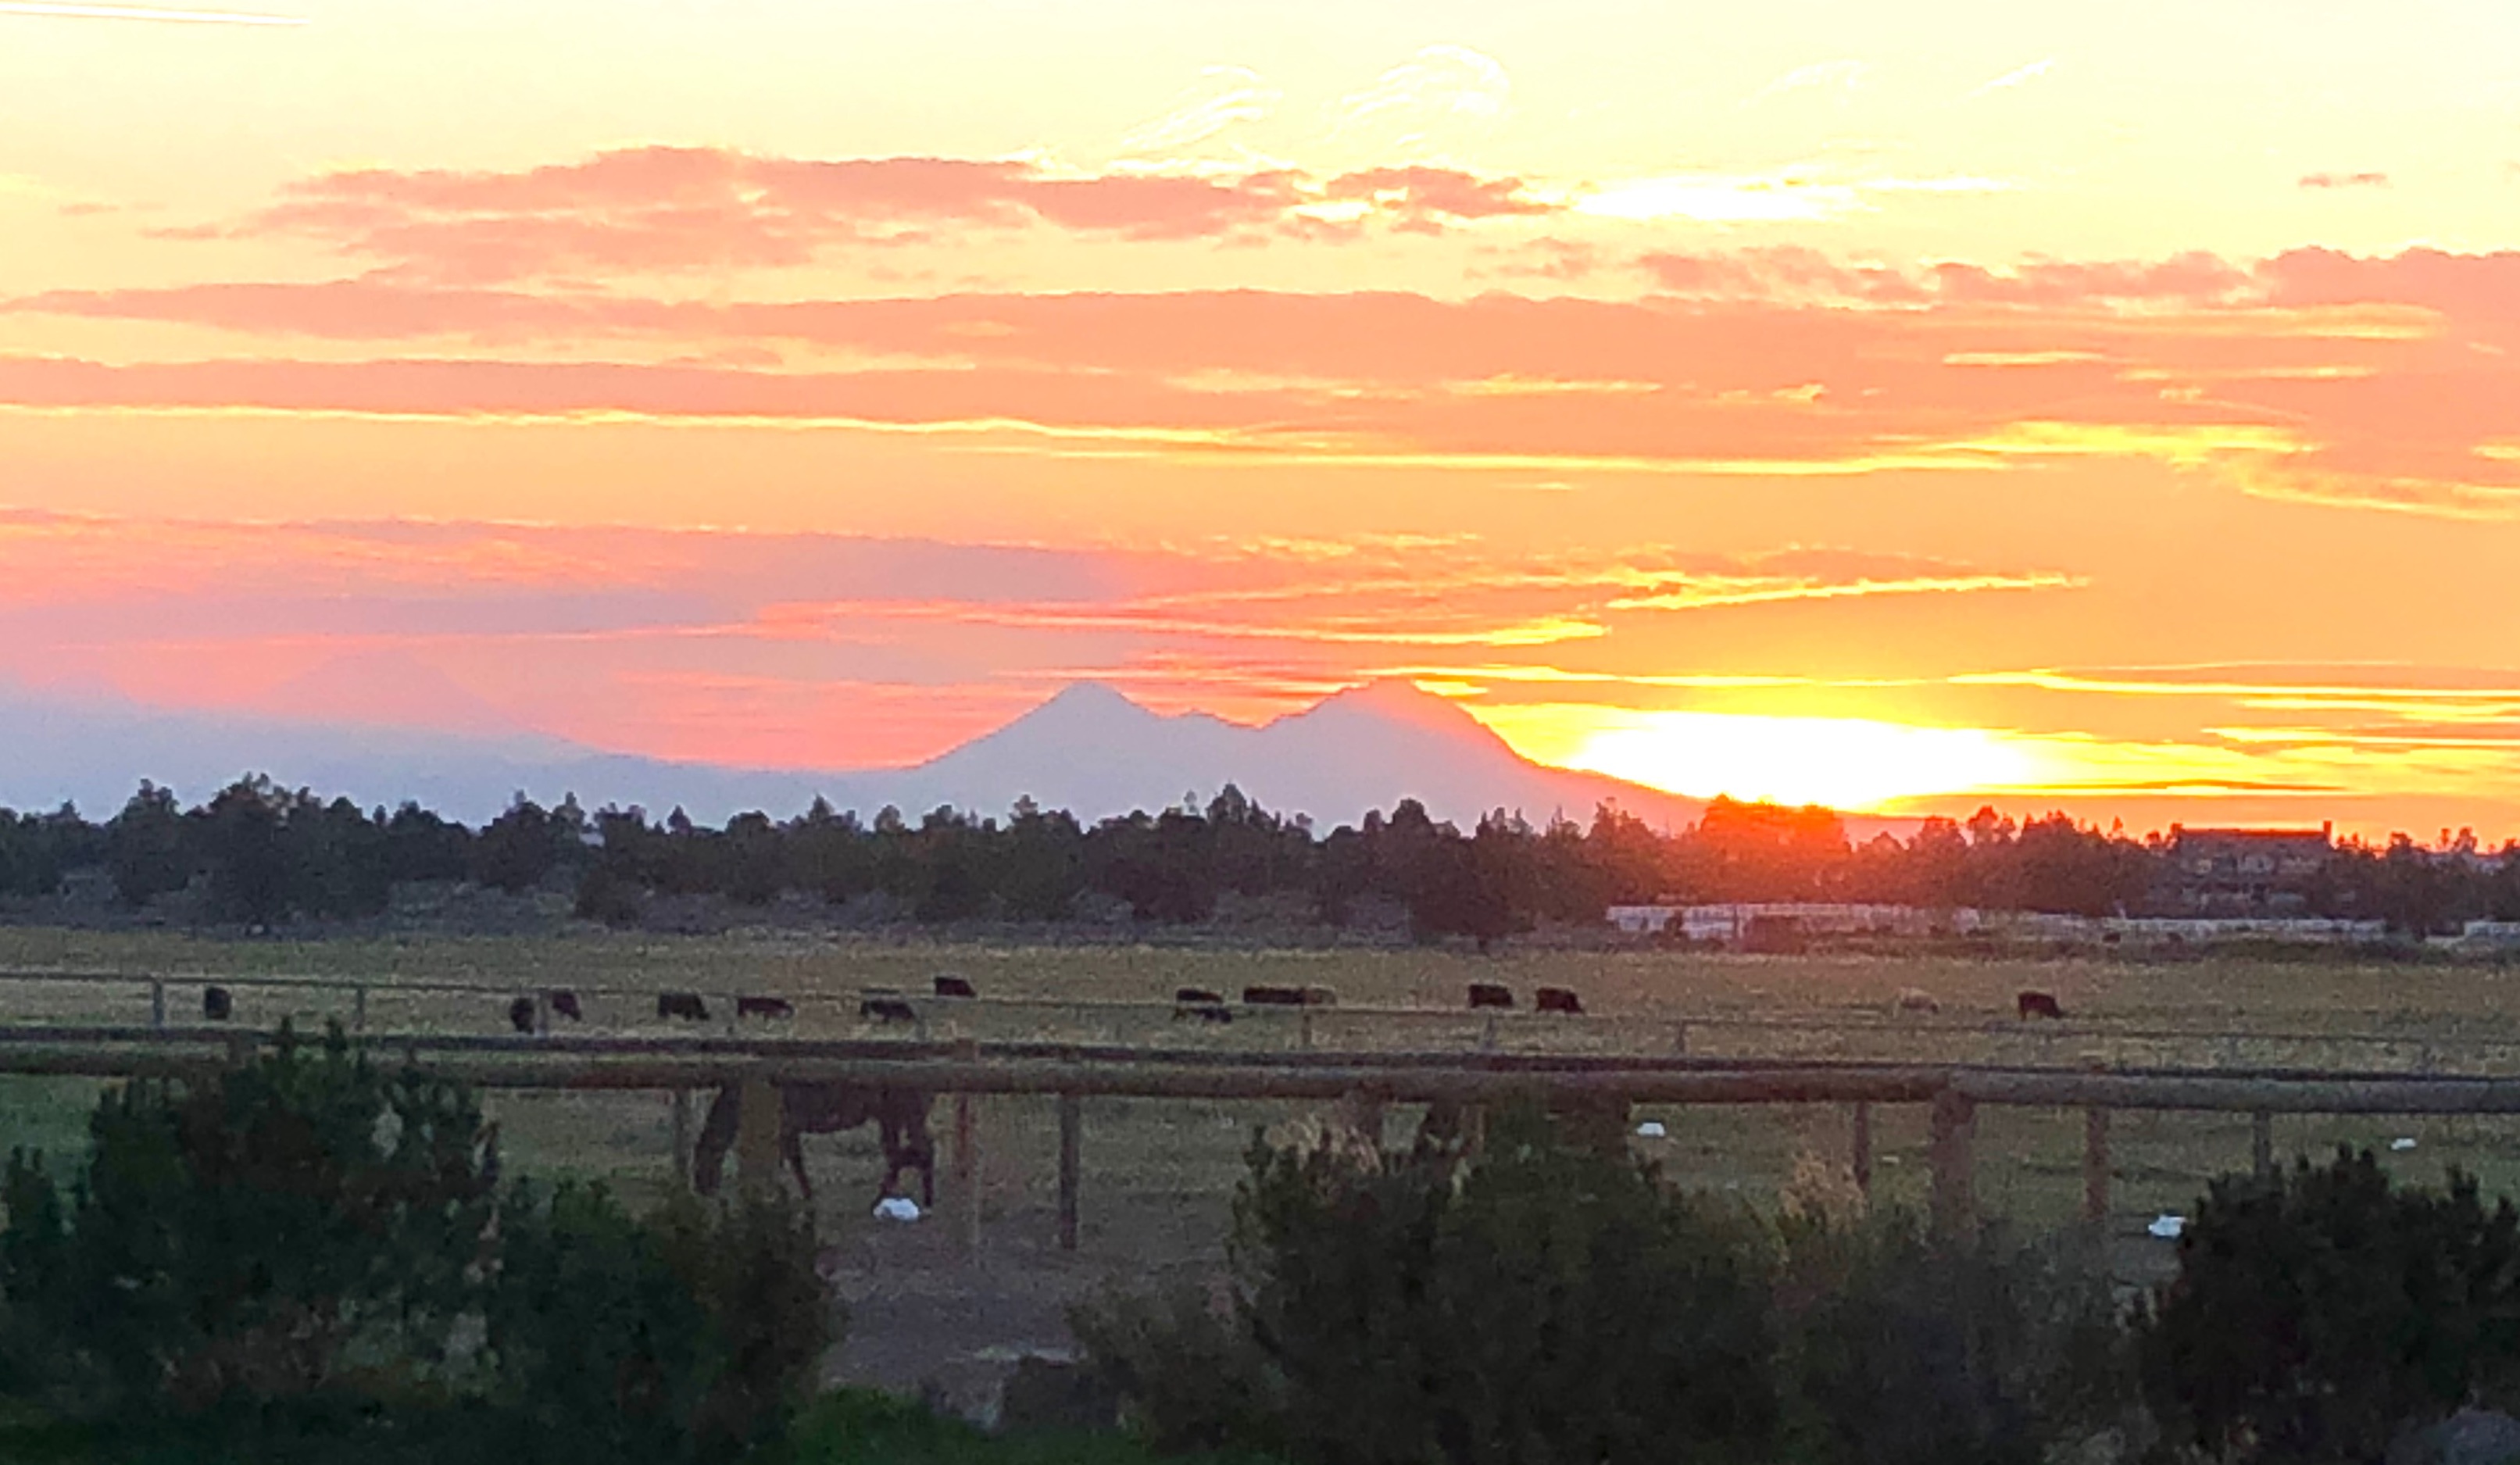 Sunset on the Ranch. Uploaded by Flying Flower Ranch, LLC